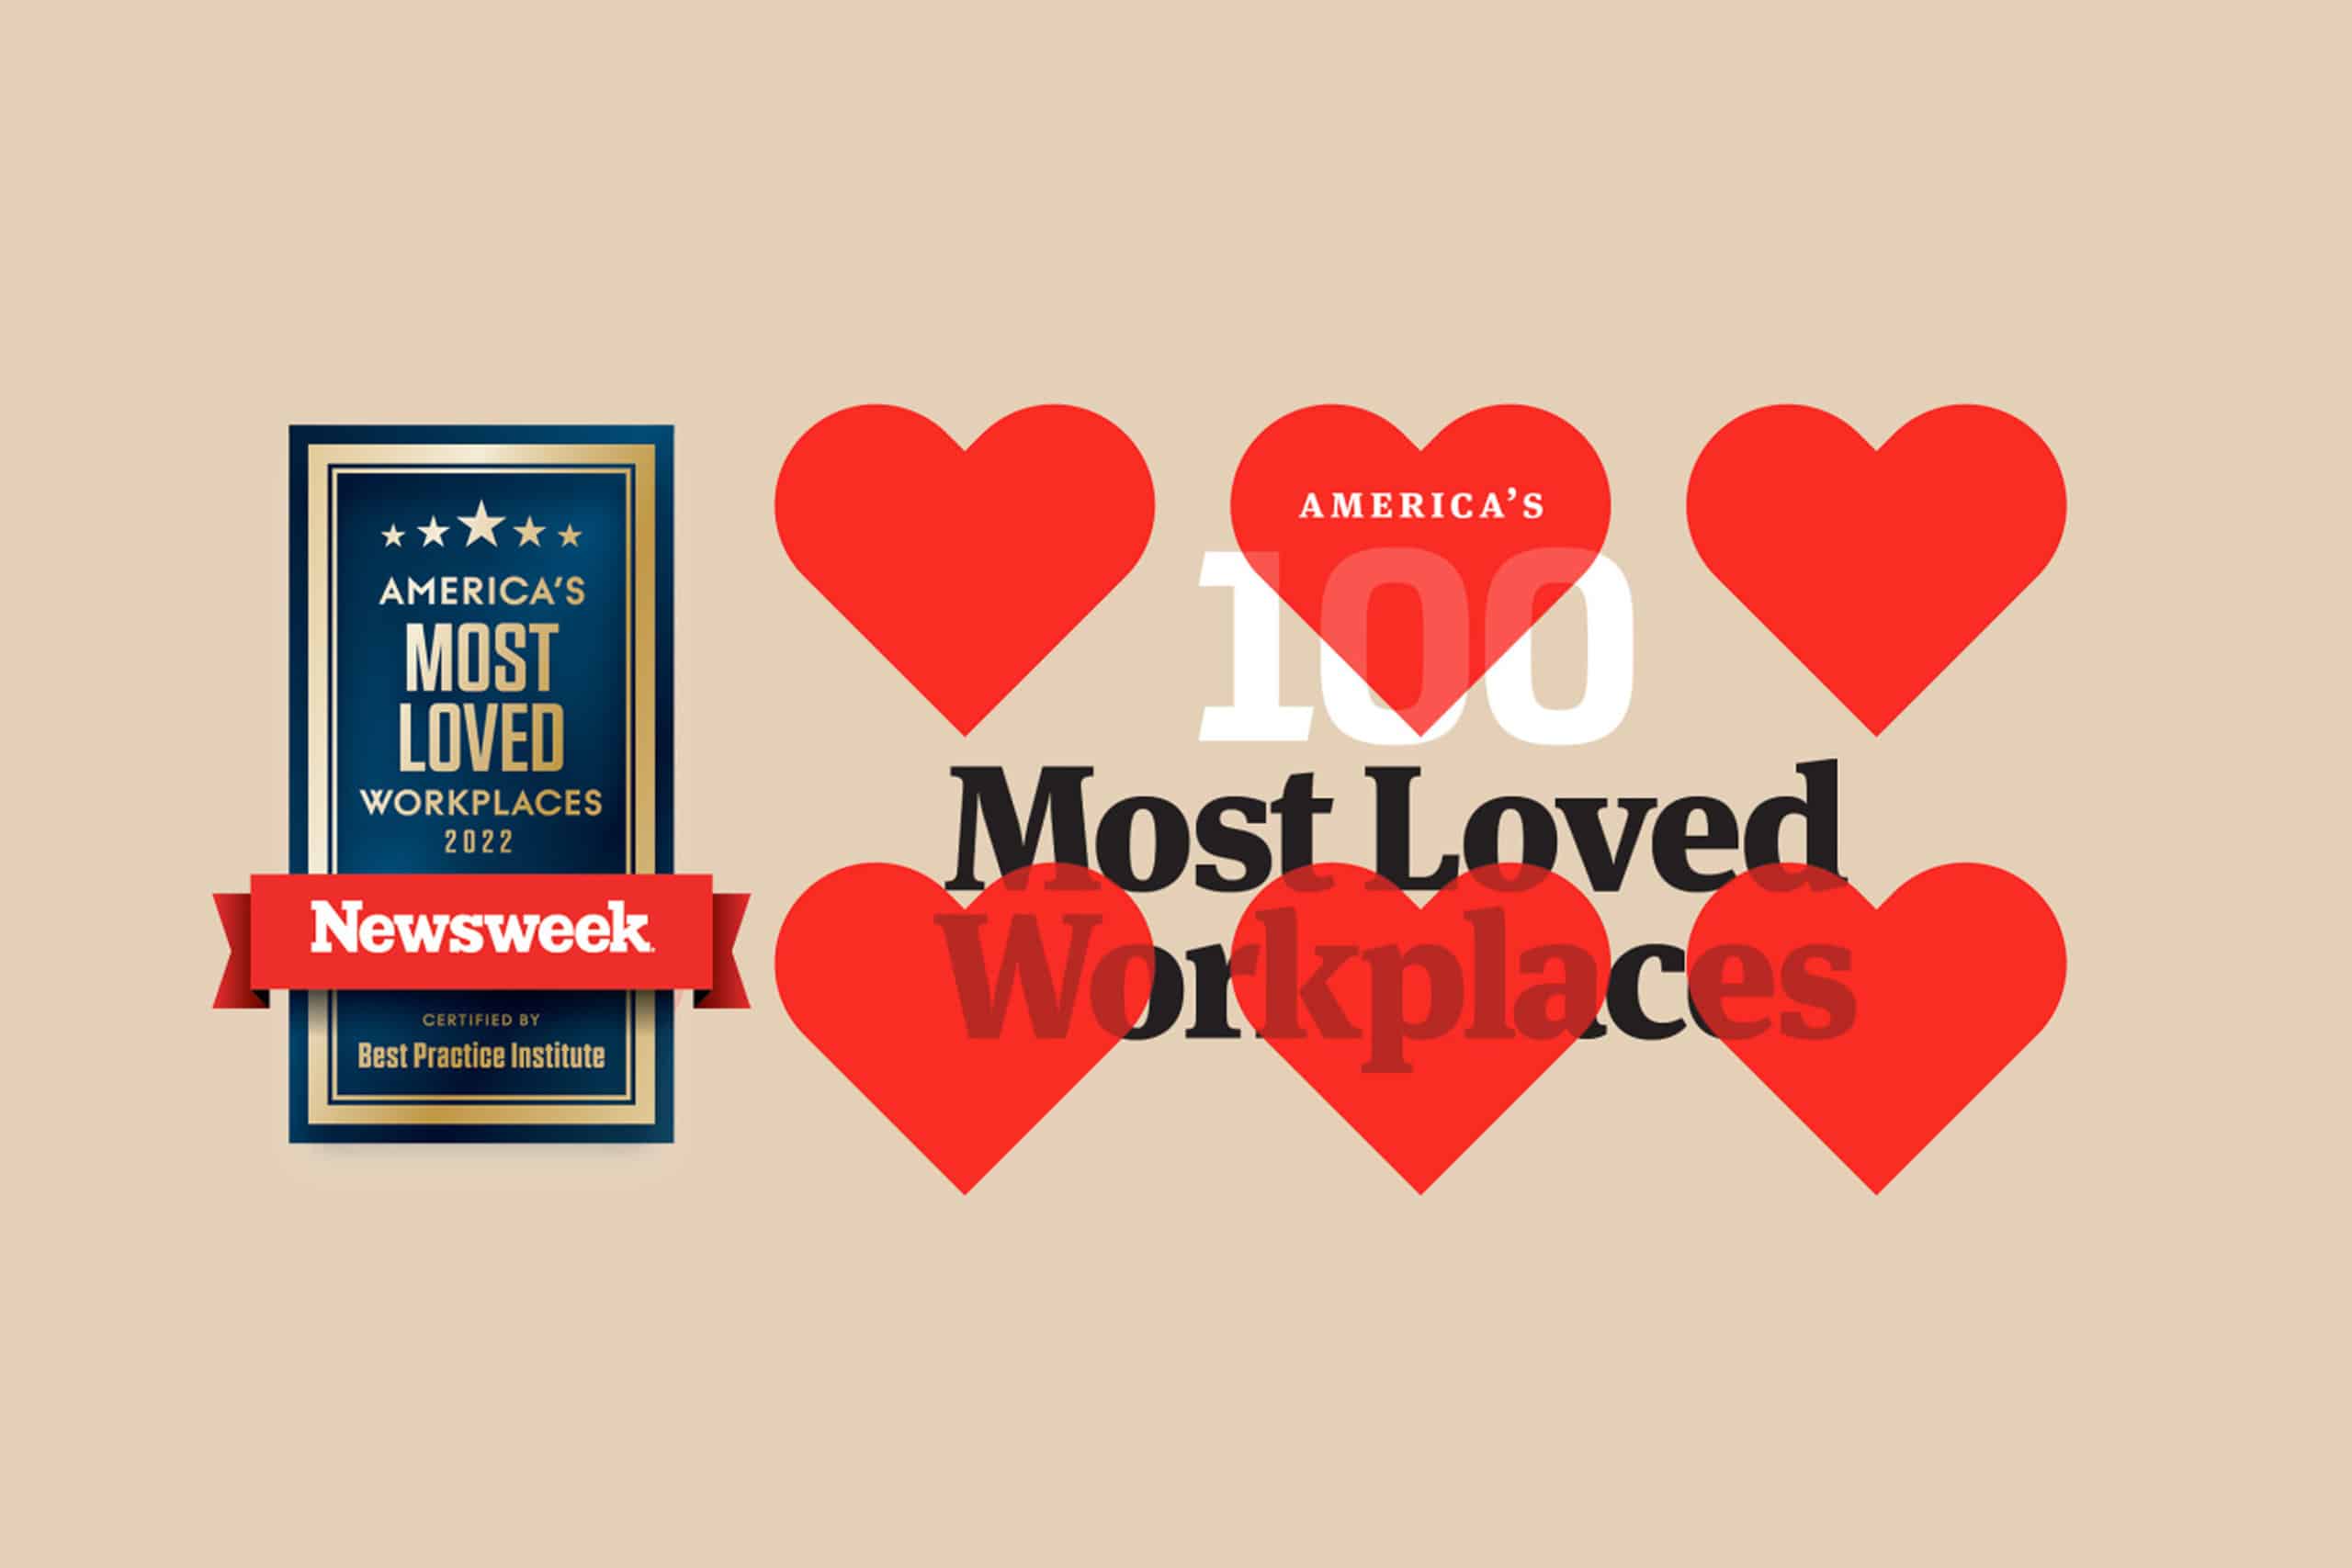 An image showing most loved workplaces in 2022 for which Greif belongs